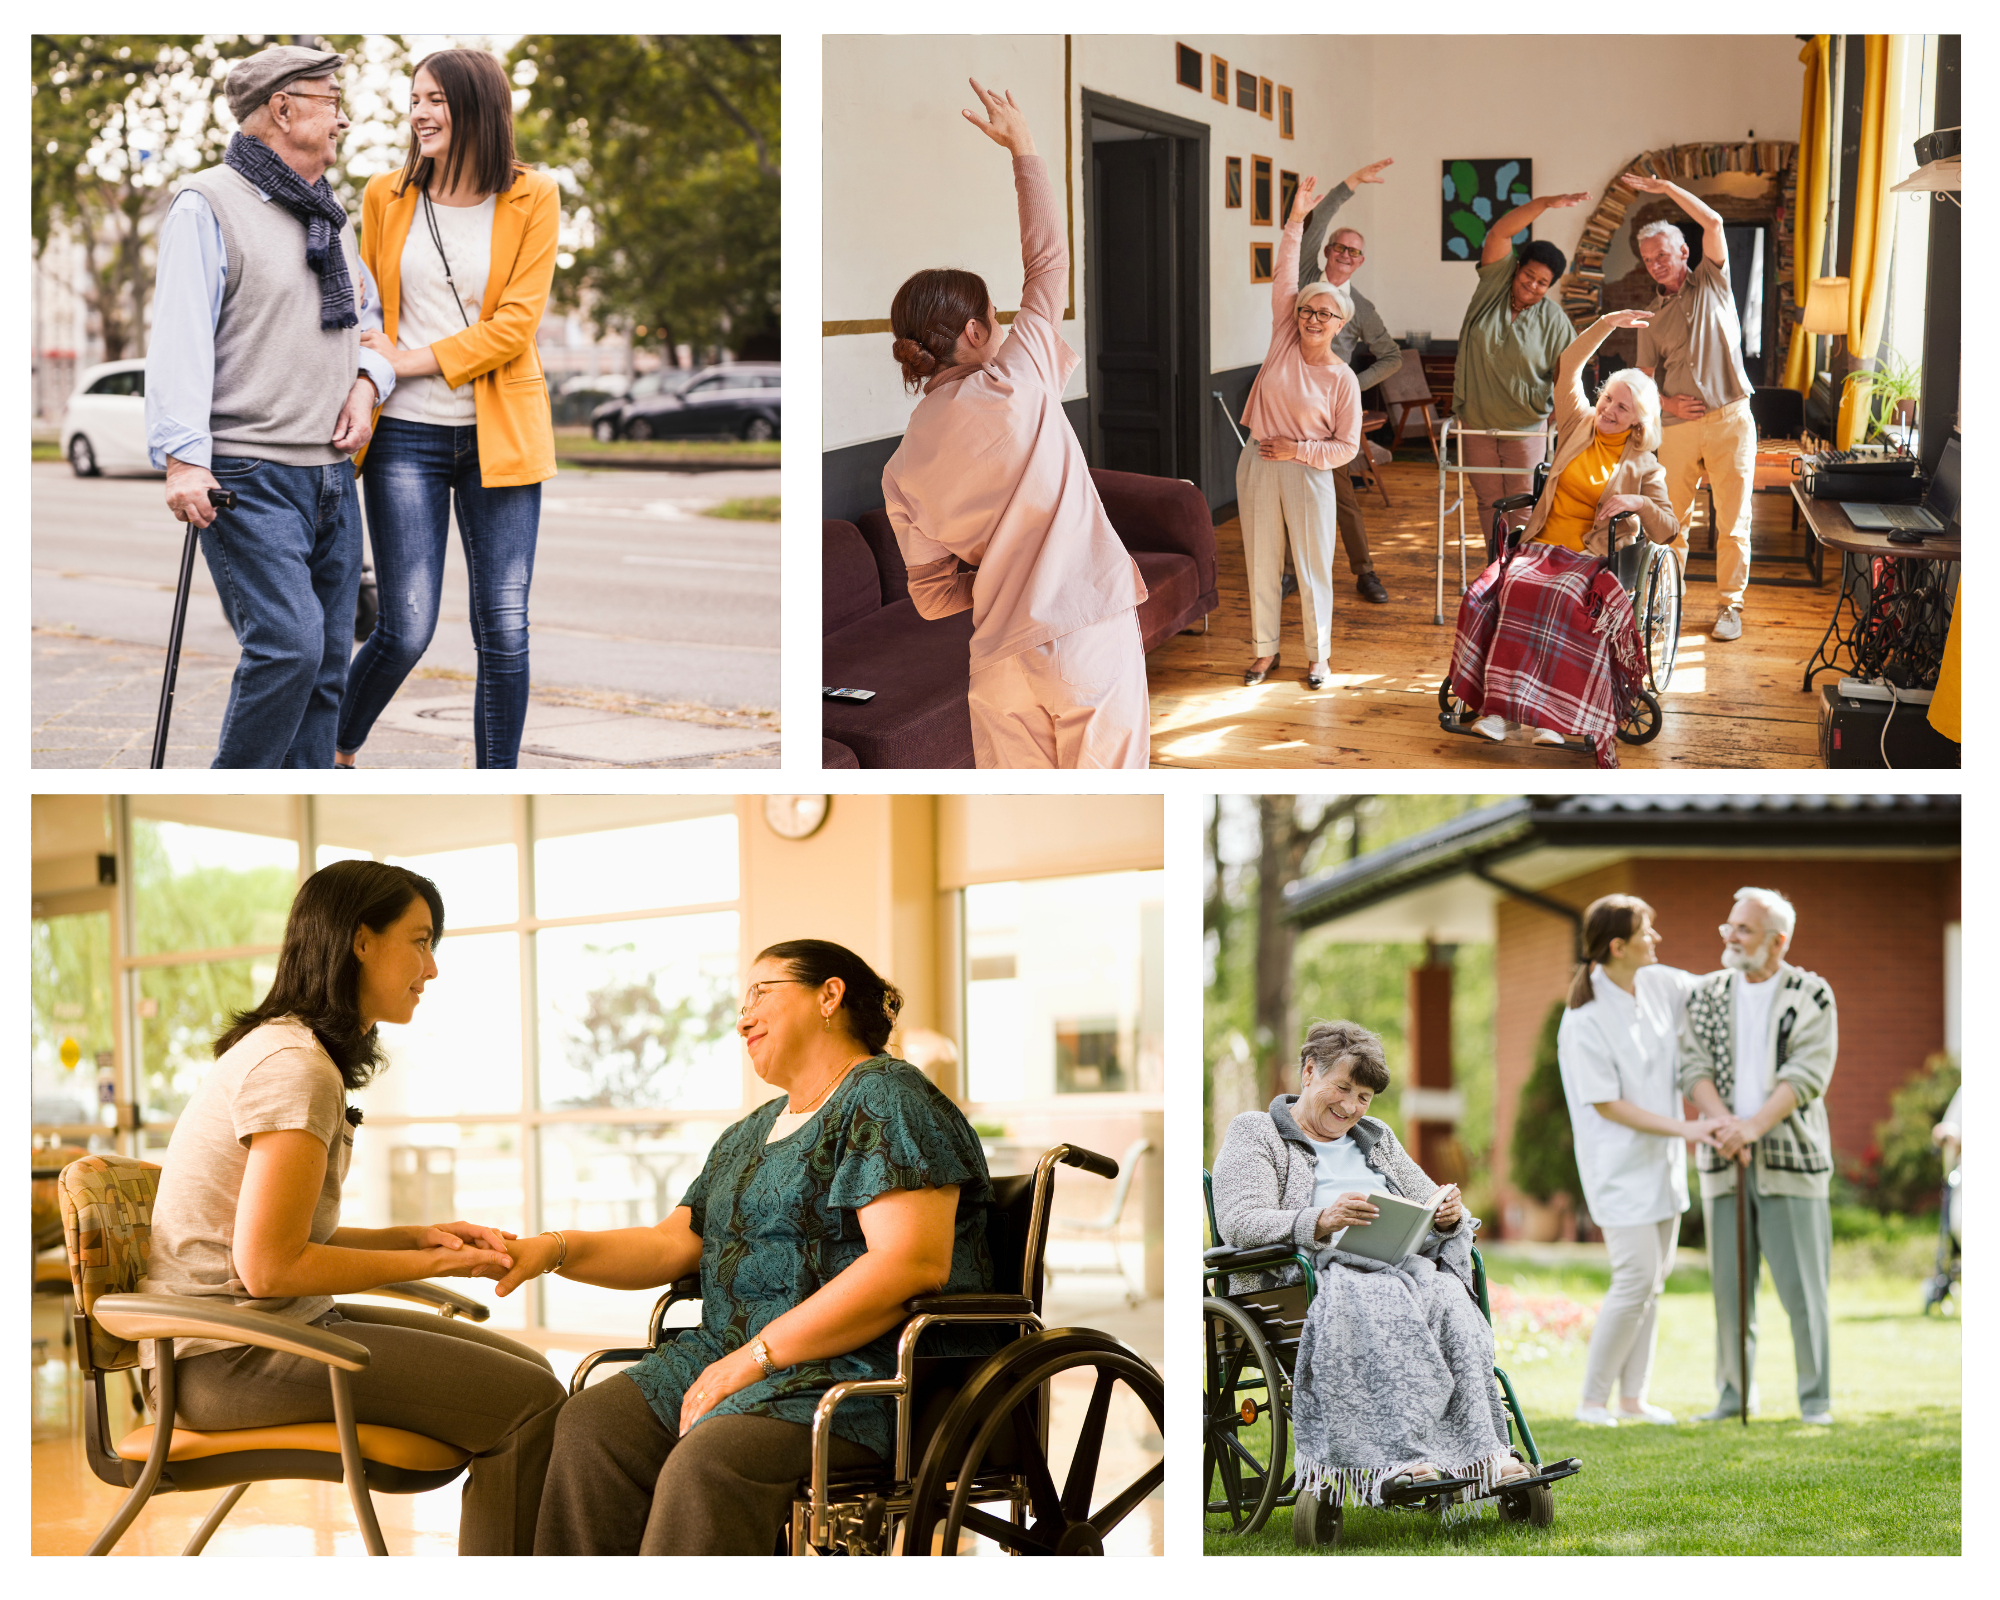 Learn more about the different types of caregivers